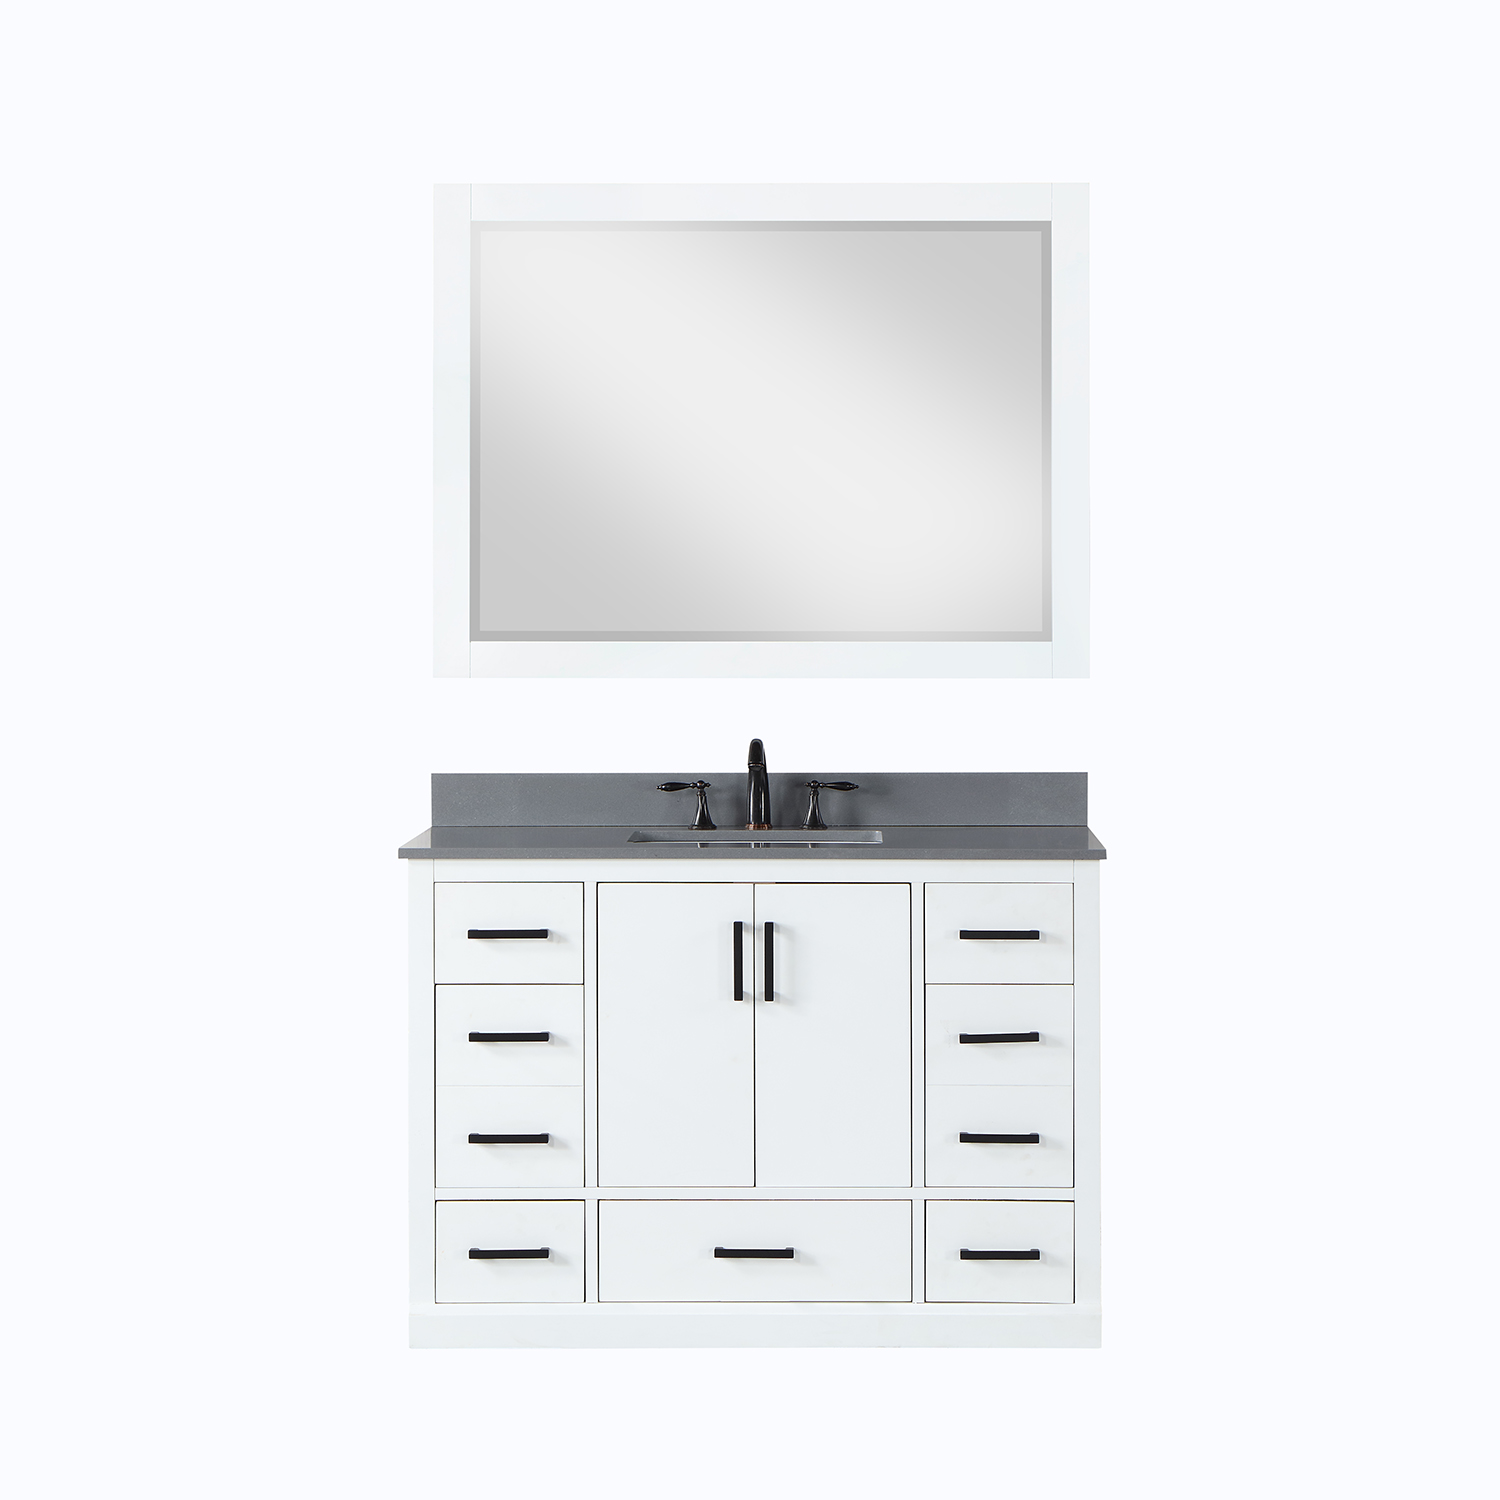 Issac Edwards Collection 48" Single Bathroom Vanity Set in White with Concrete Grey Composite Stone Countertop without Mirror 